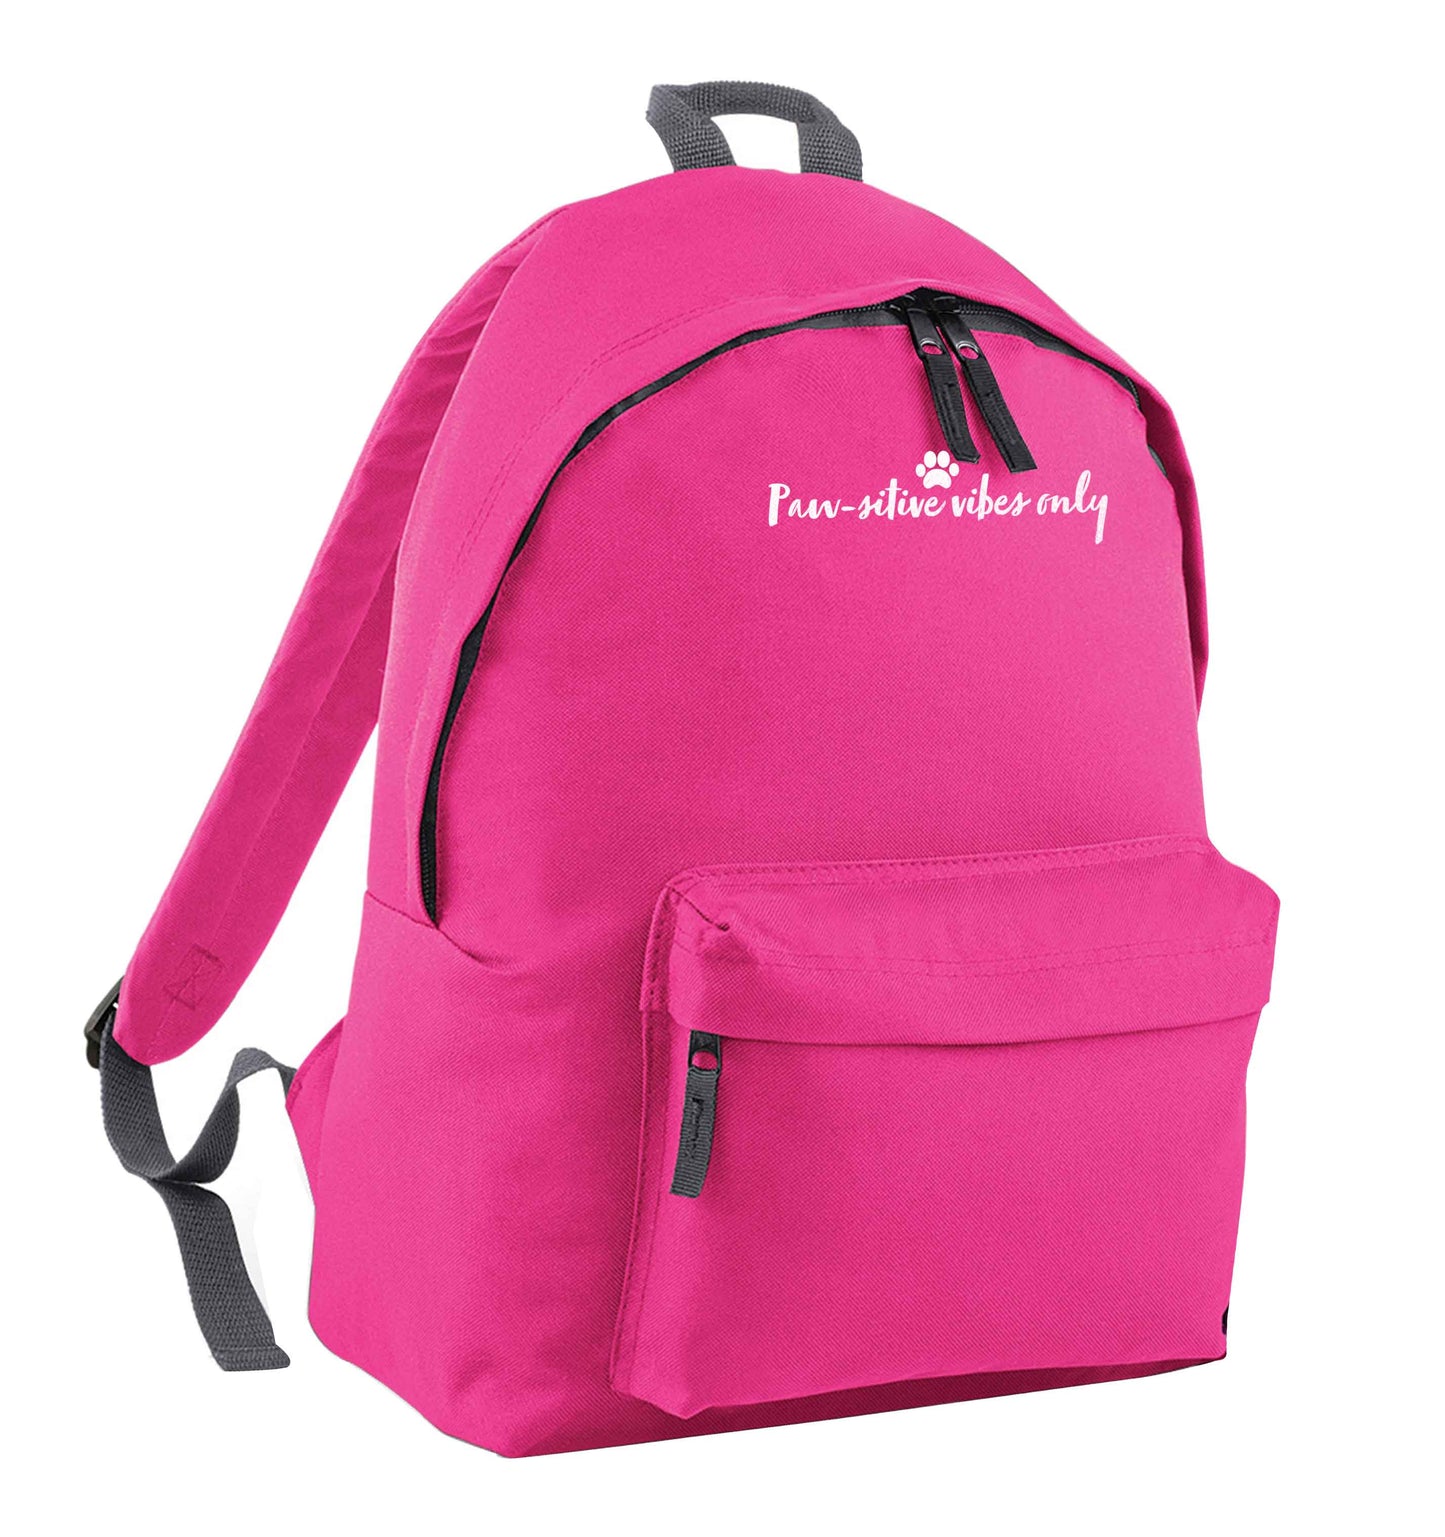 Pawsitive vibes only Kit pink children's backpack